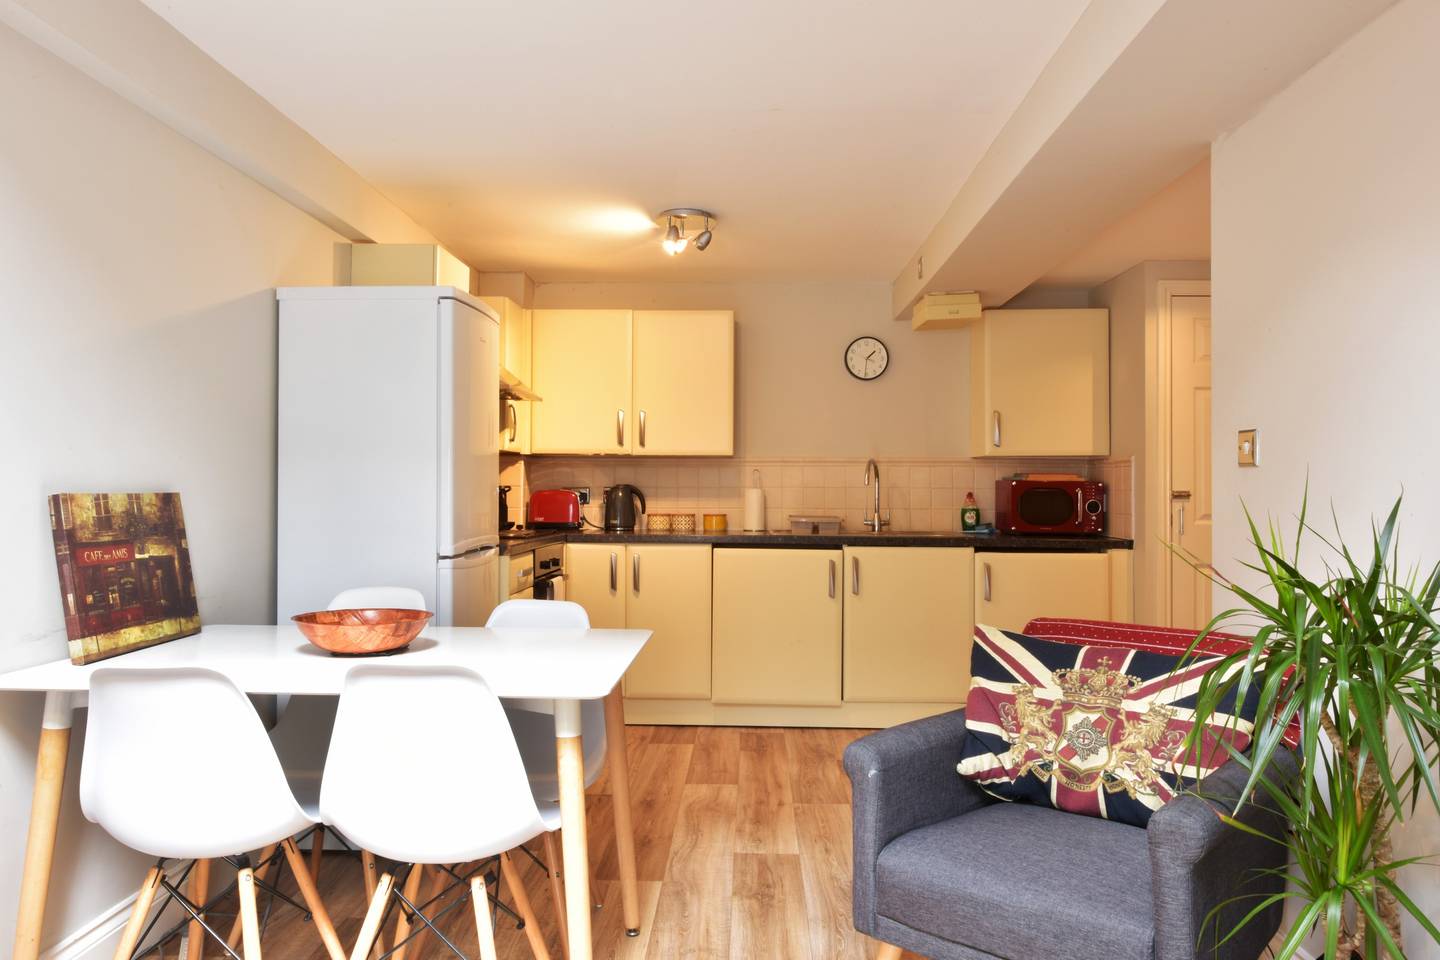 Property Image 2 - Roper Road - 2 bedroom apartment in The Maltings near West Station